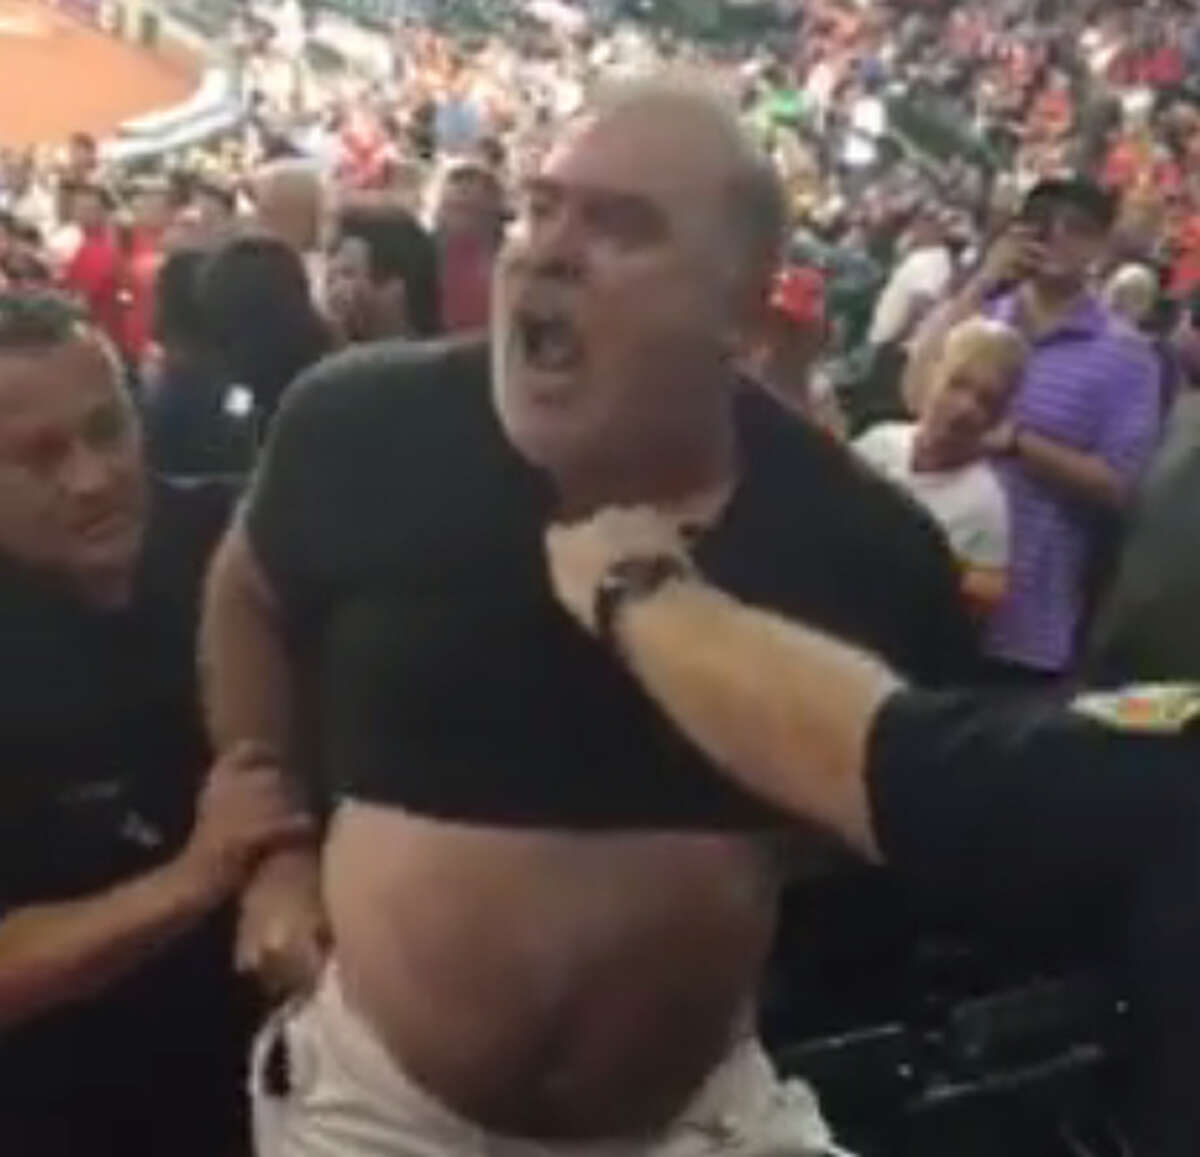 A fan at Monday night's Astros-Rangers game had a few choice words for the Rangers as he was handcuffed and escorted from Minute Maid Park.